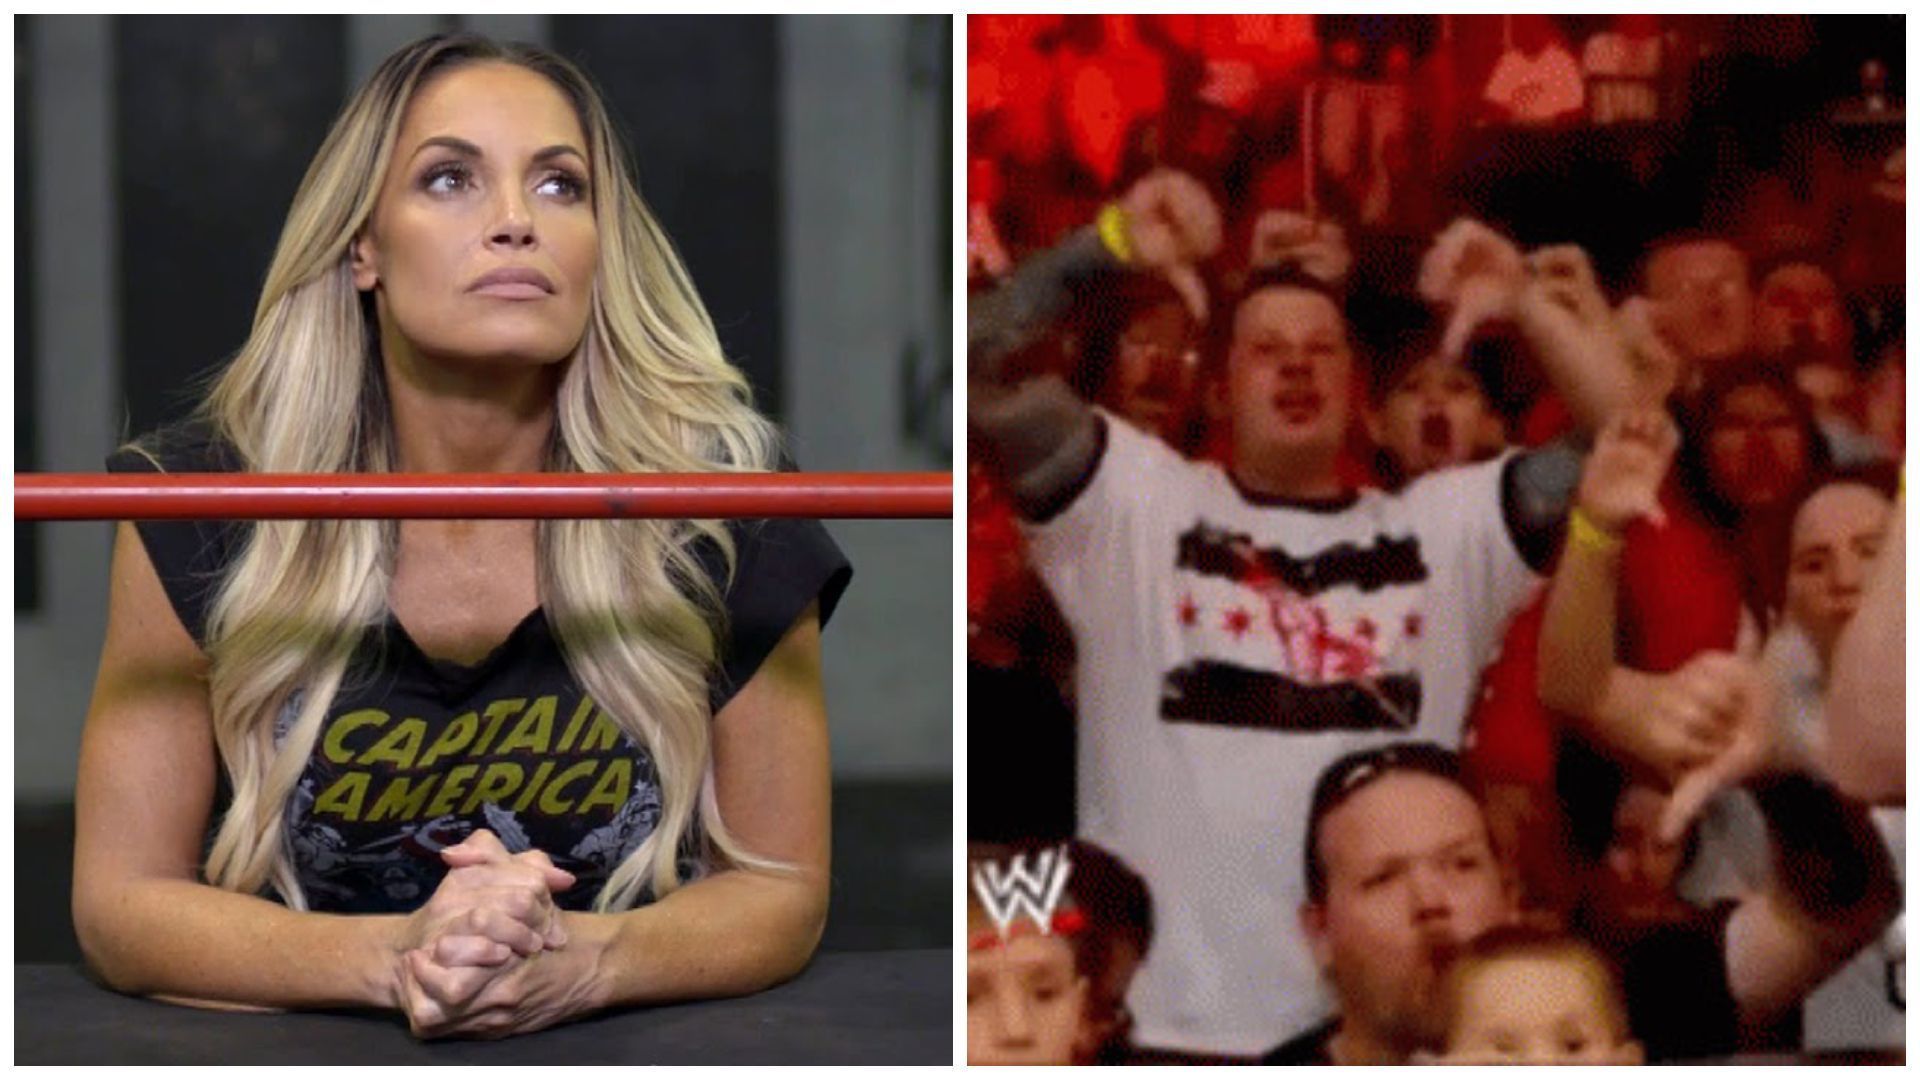 Trish Stratus is a former seven-time WWE women